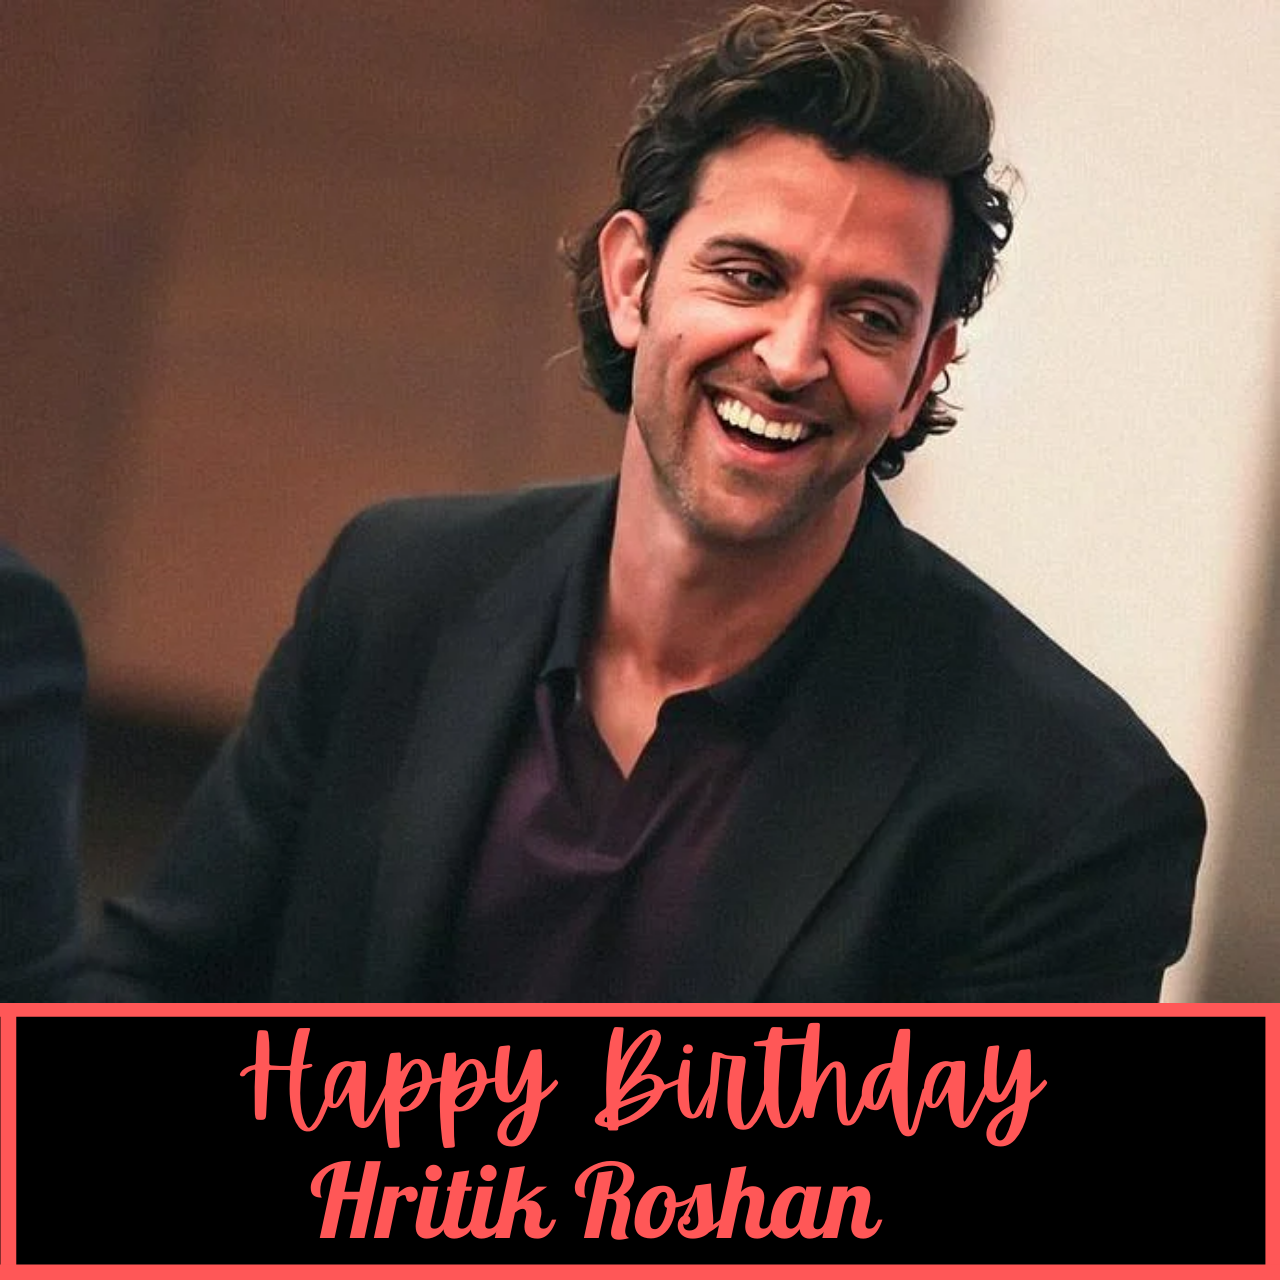 Happy Birthday Hritik Roshan: Wishes, HD Images, Greetings, Quotes, Messages to greet one of the Handsome Men in the World